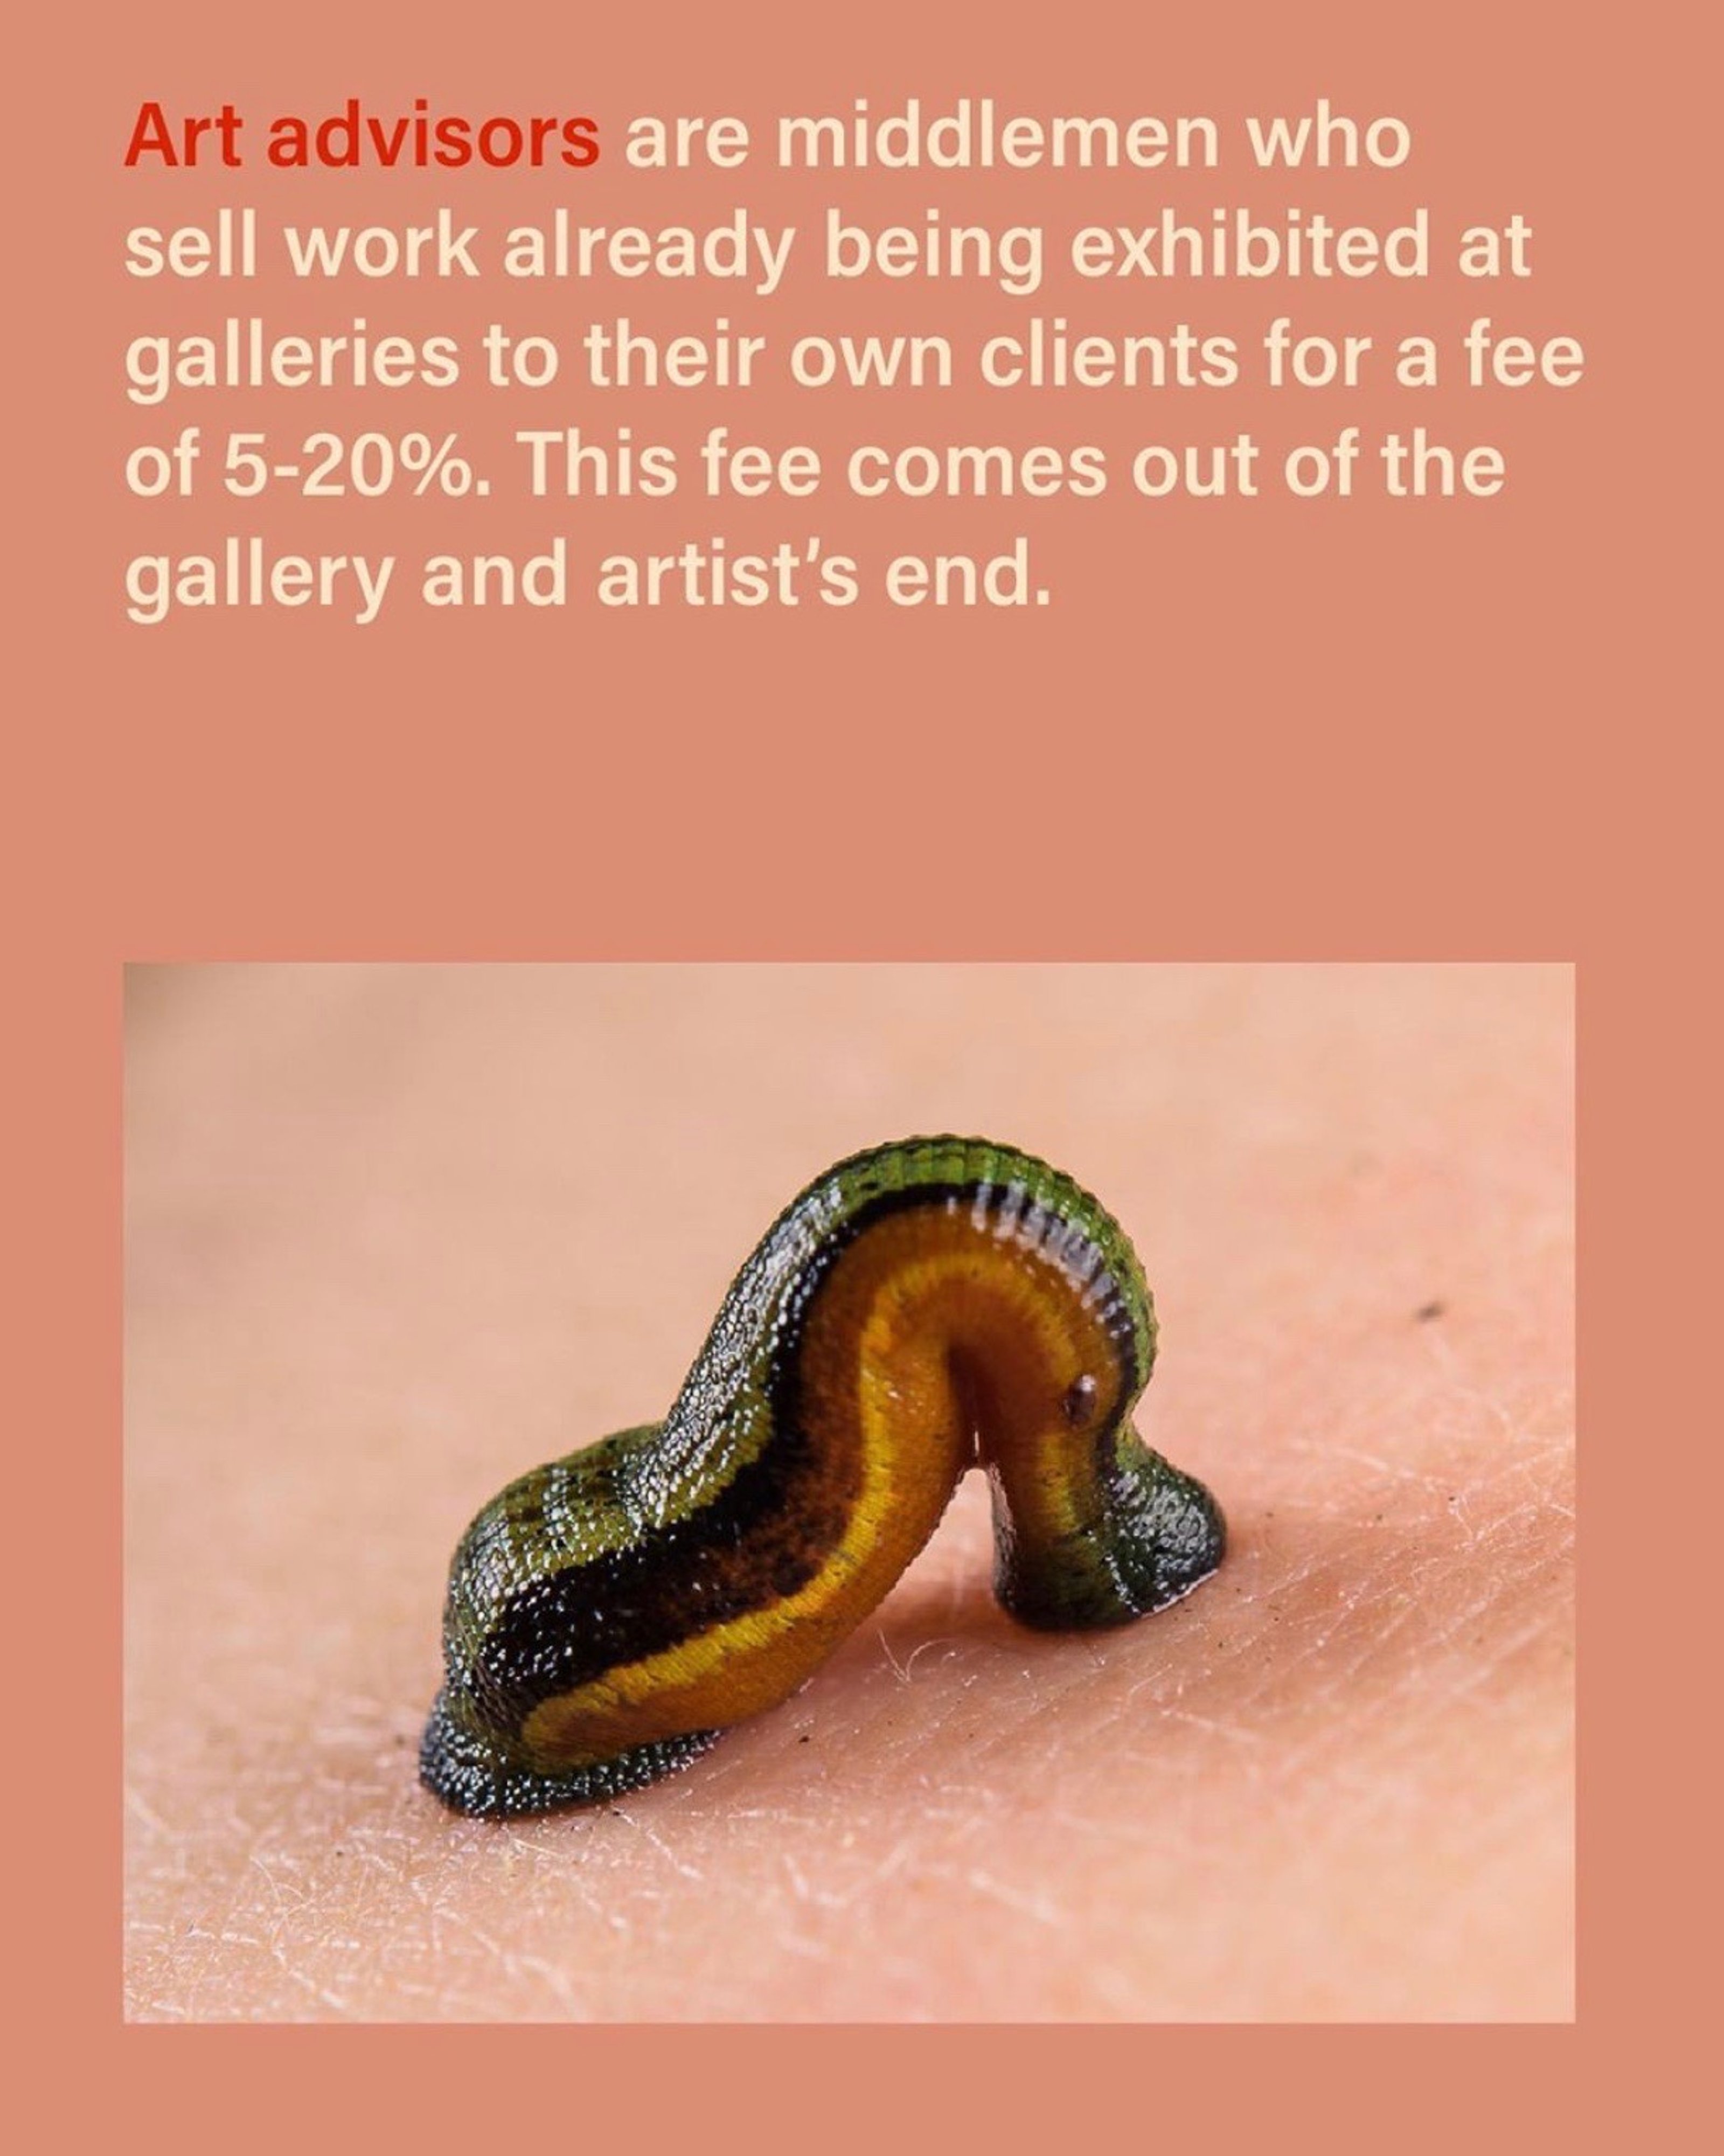 Picture showing a leech sucking blood with text about art advisors taking commissions from art sales at the expense of galleries and artists and not contributing to culture